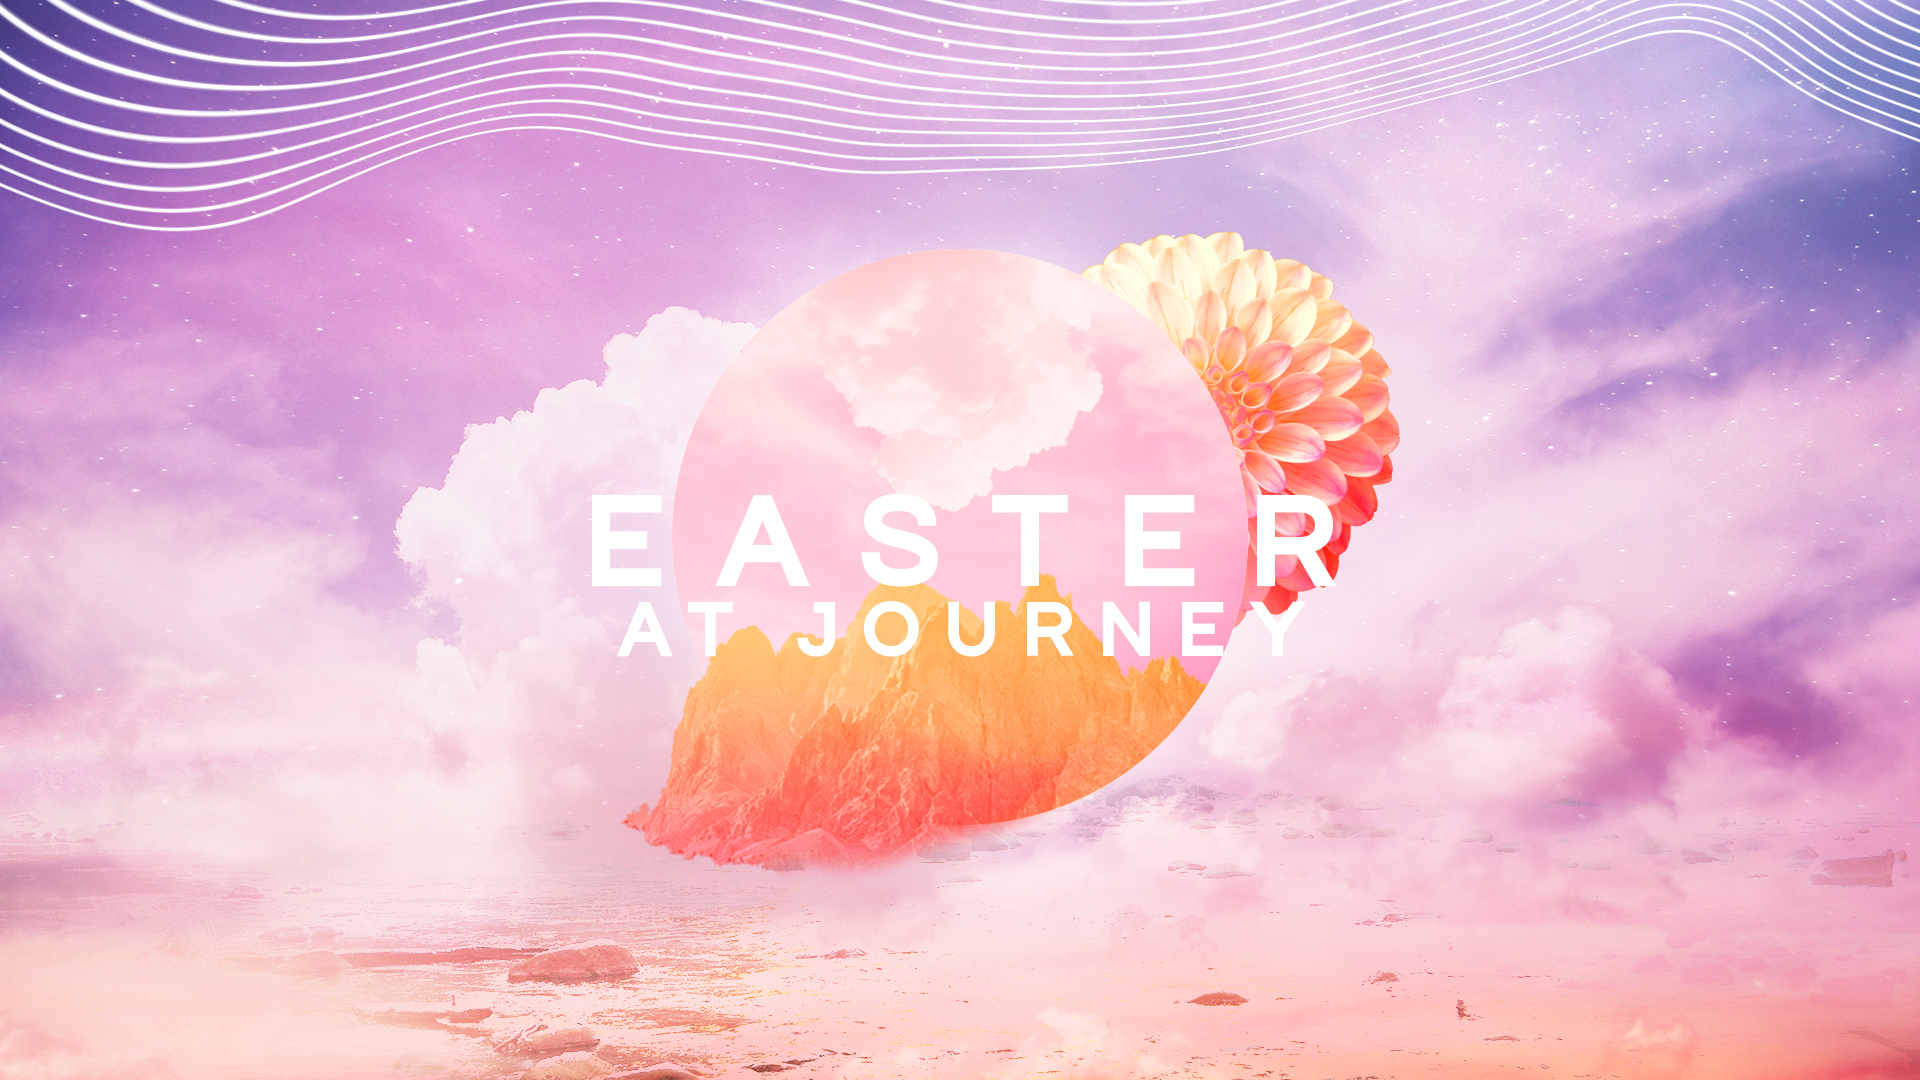 Easter At Journey 2019